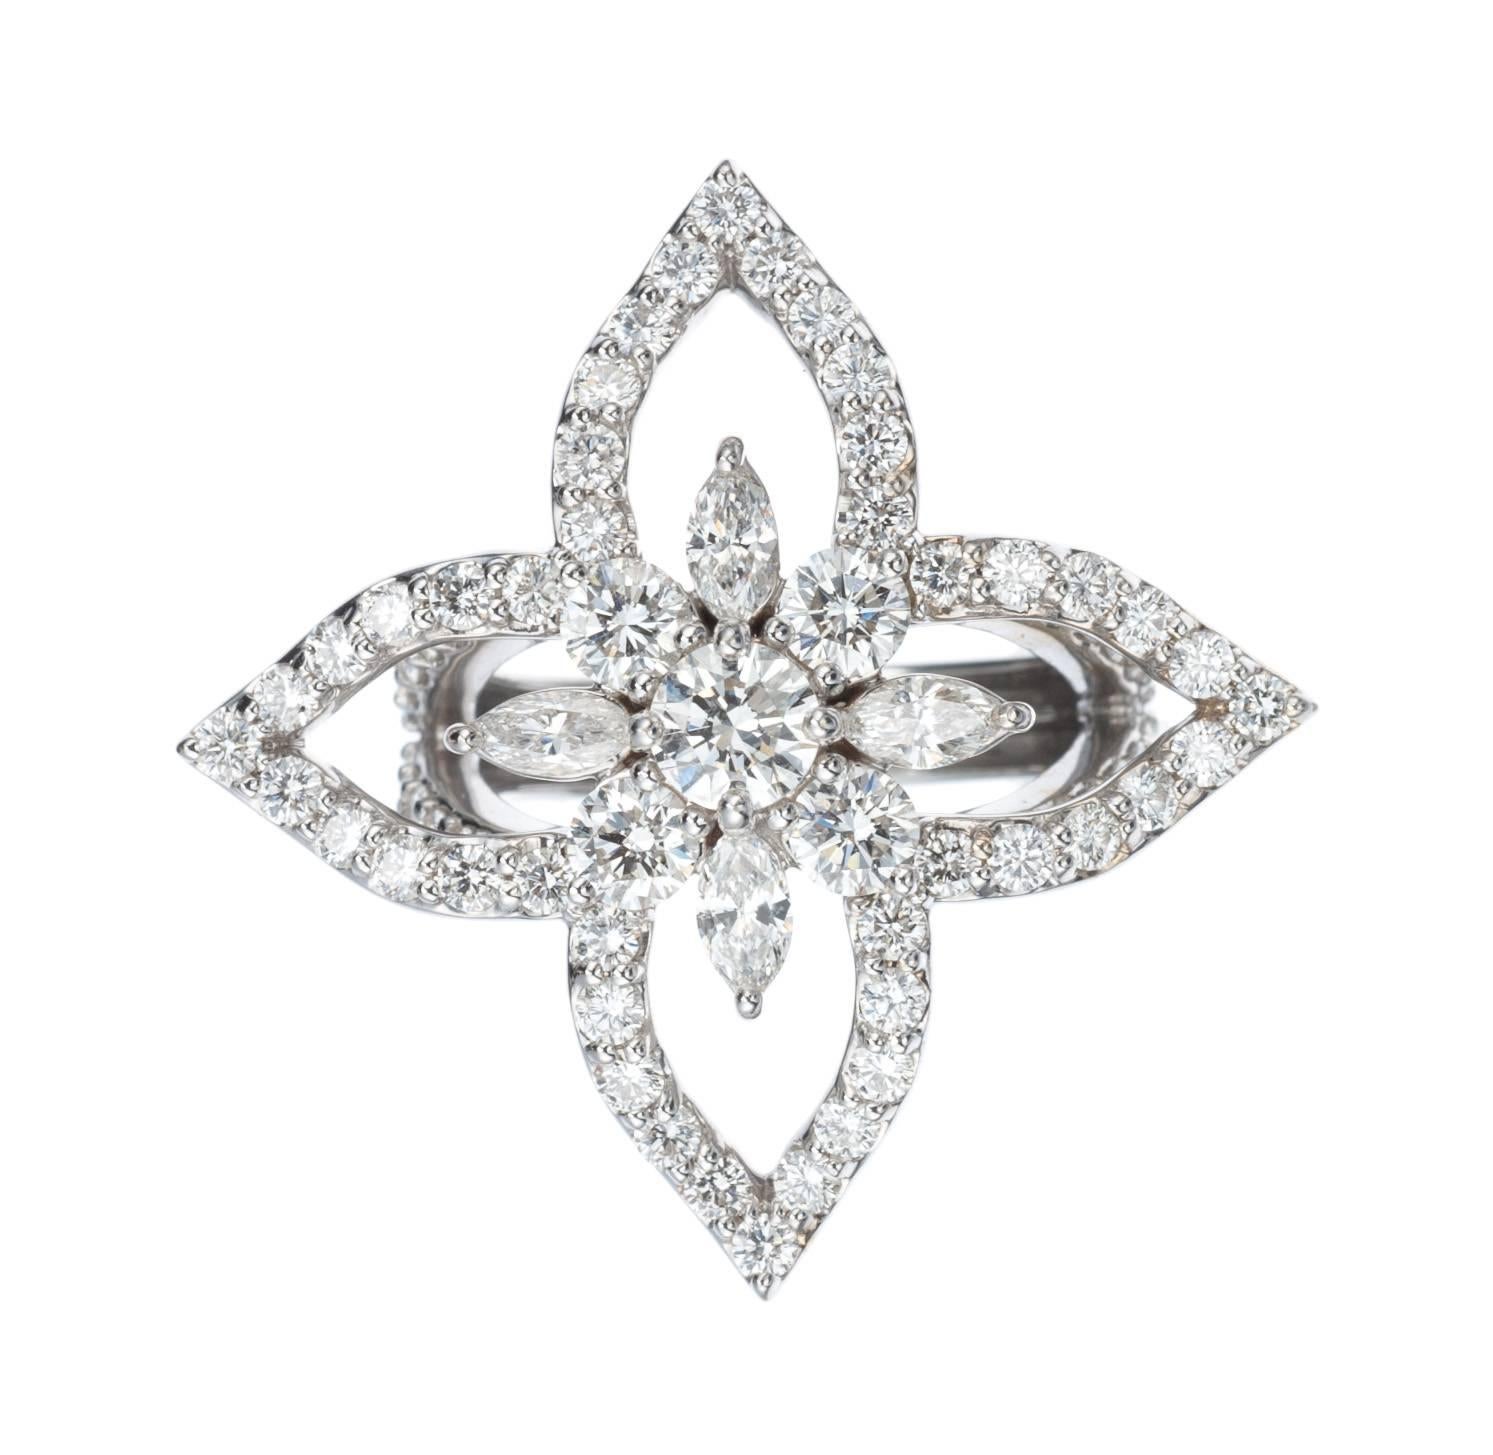 The echo of marquise diamonds in the open-work petals. The gently upturned tips of each petal. It is subtlety of form that gives this floral ring its allure. Set in 18-karat white gold, a mix of diamond shapes and sizes compose the flower, including